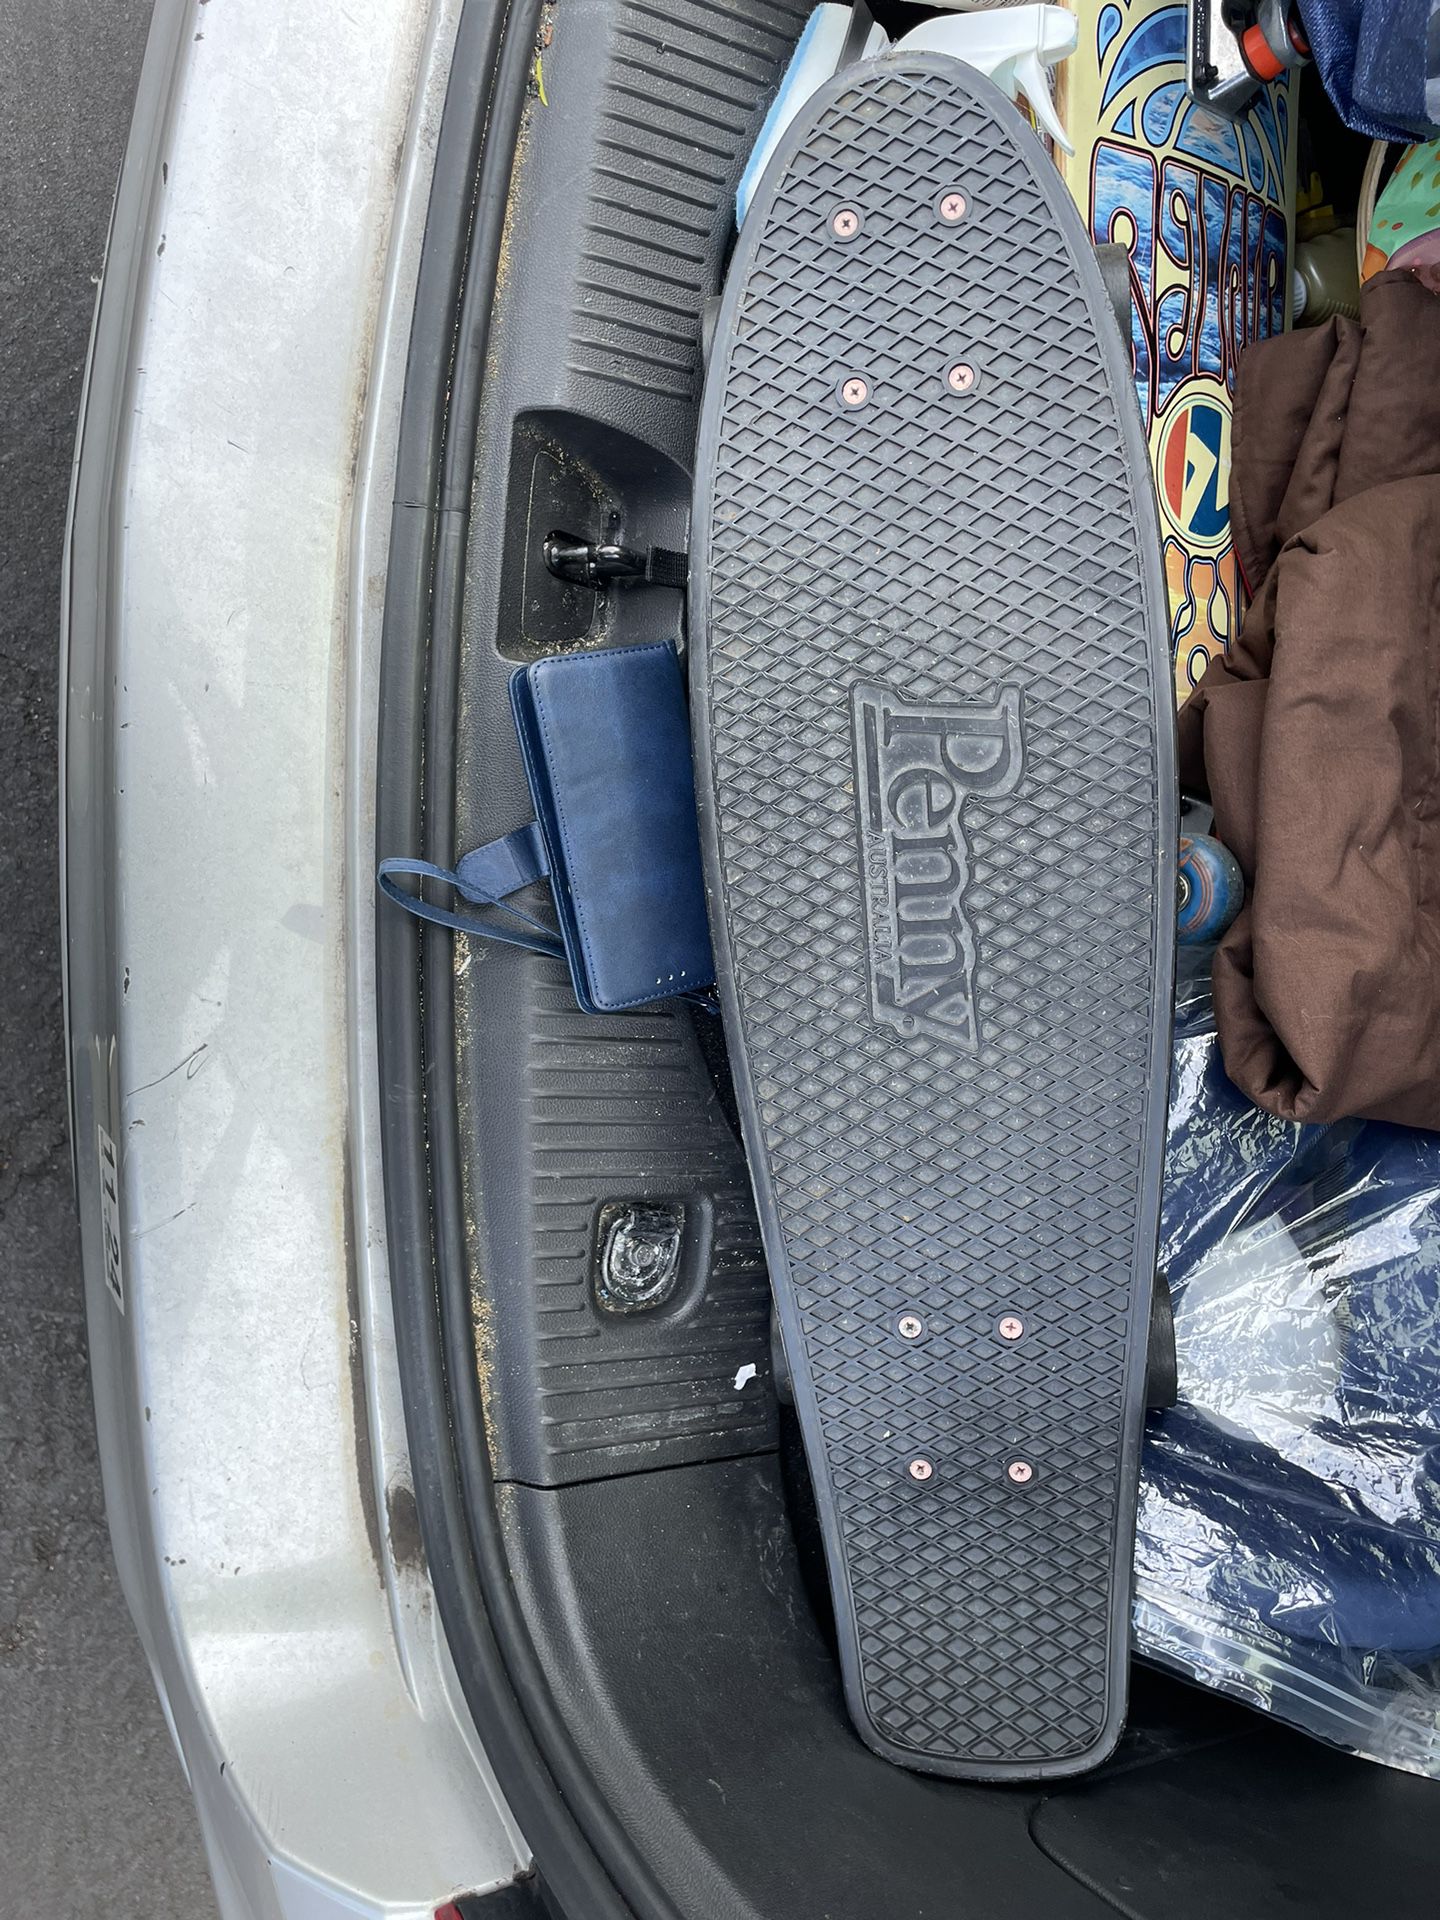 Excellent condition skateboard